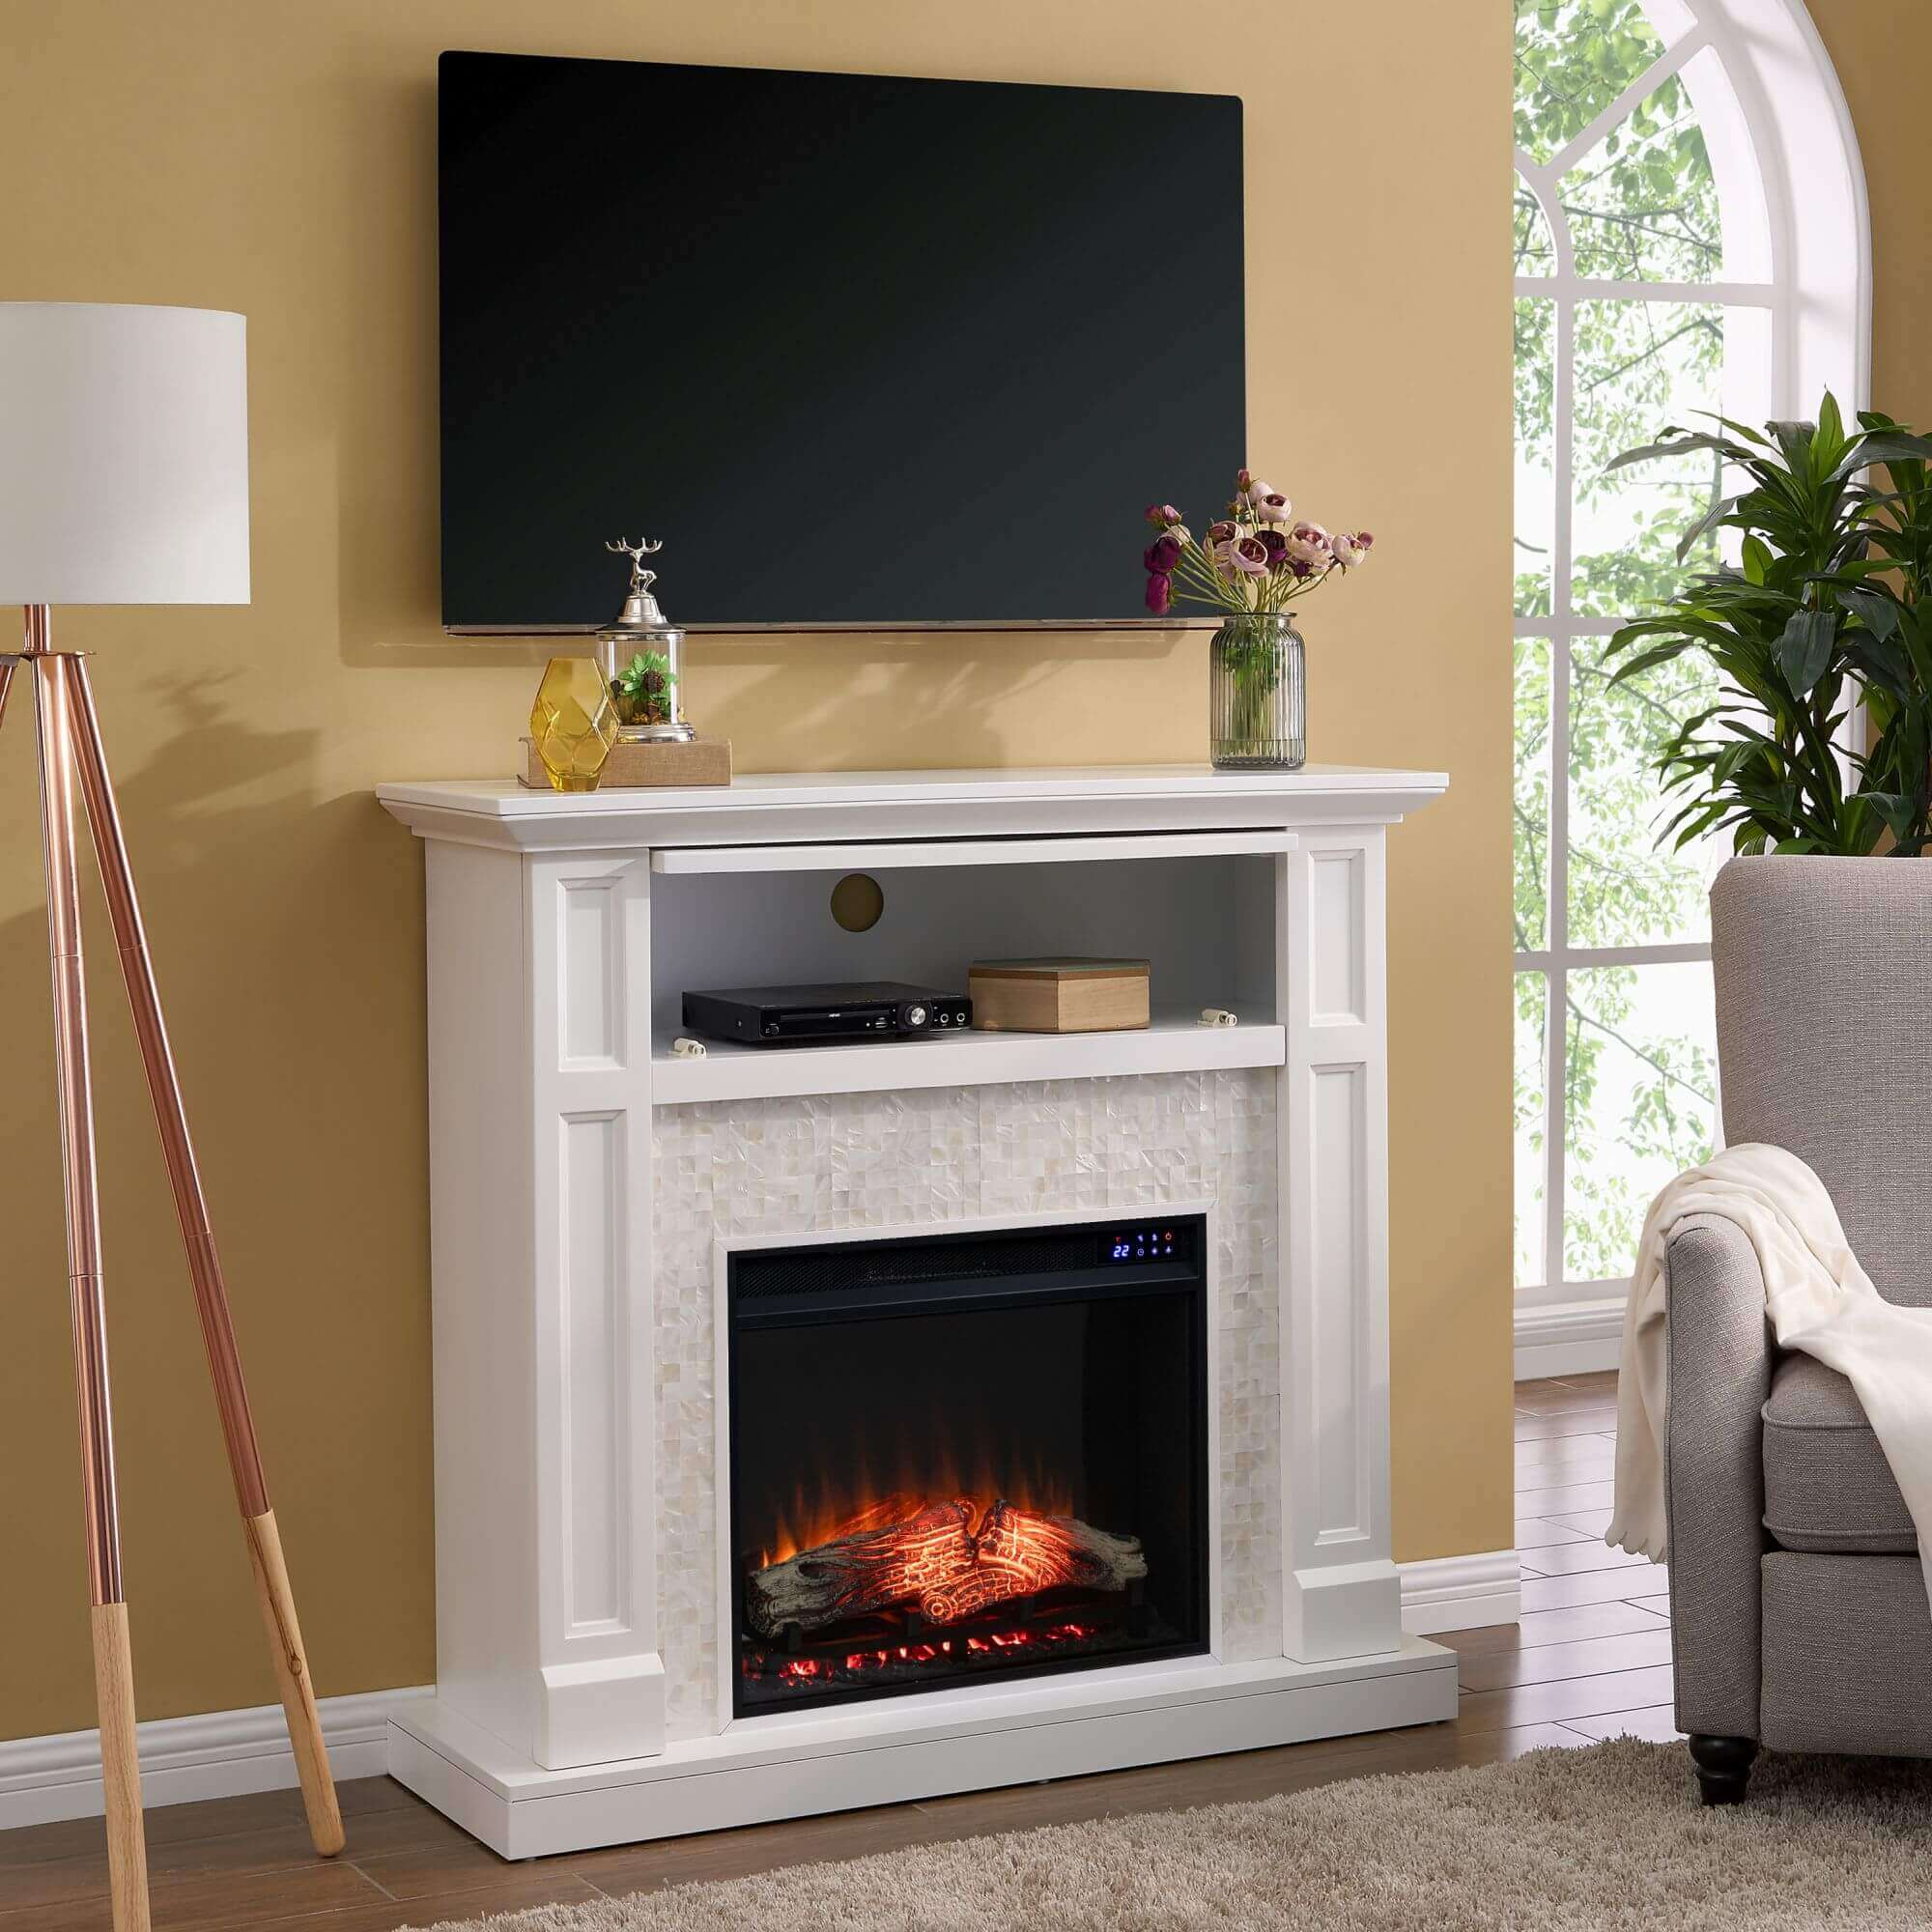 Nobleman Touch Screen Electric Media Fireplace with Tile Surround